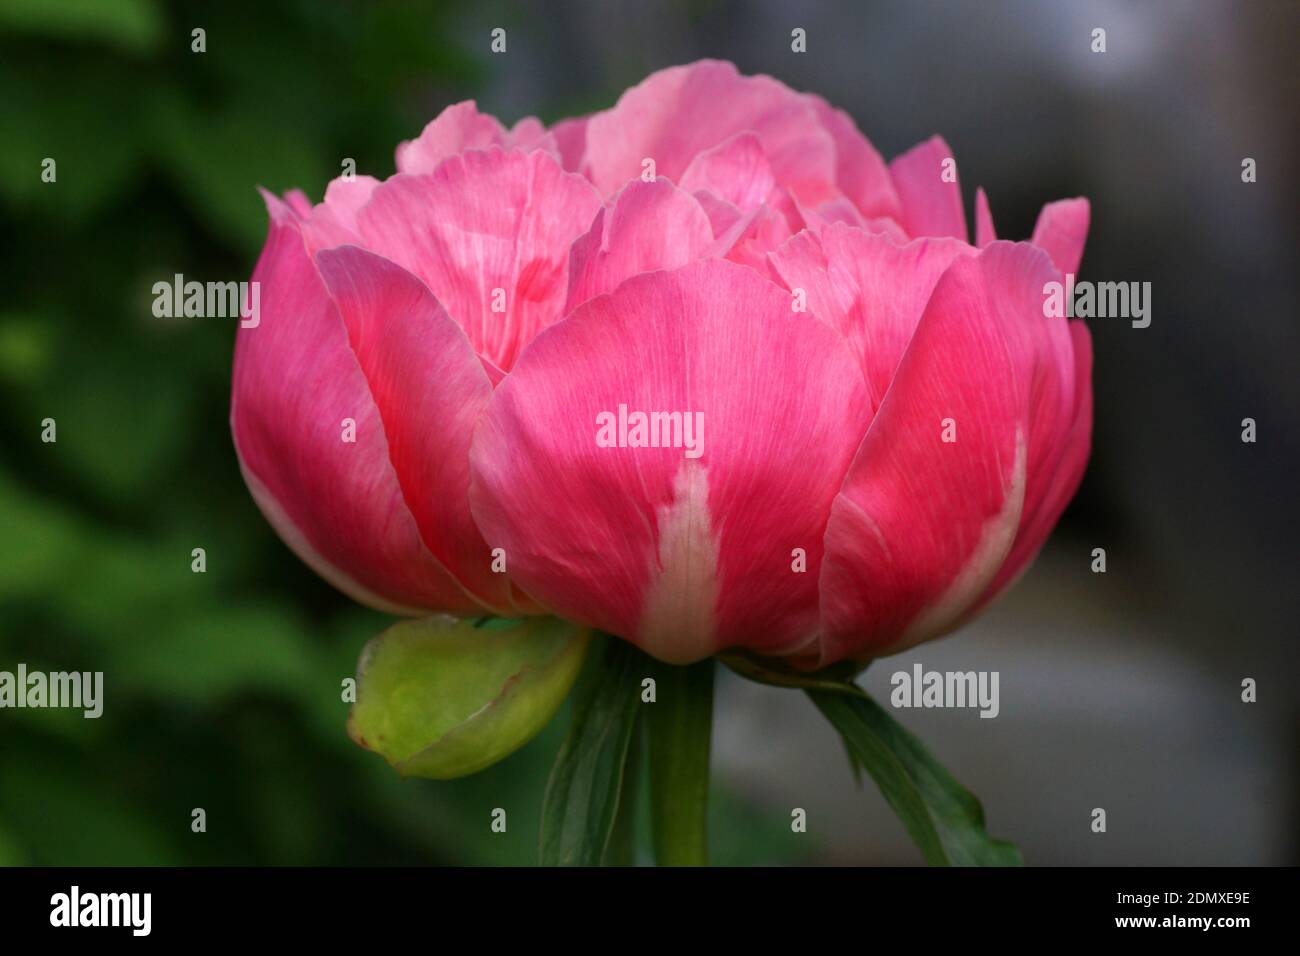 Peony Coral Supreme.  Semi-double salmon pink peony flower blooms in the garden. Stock Photo